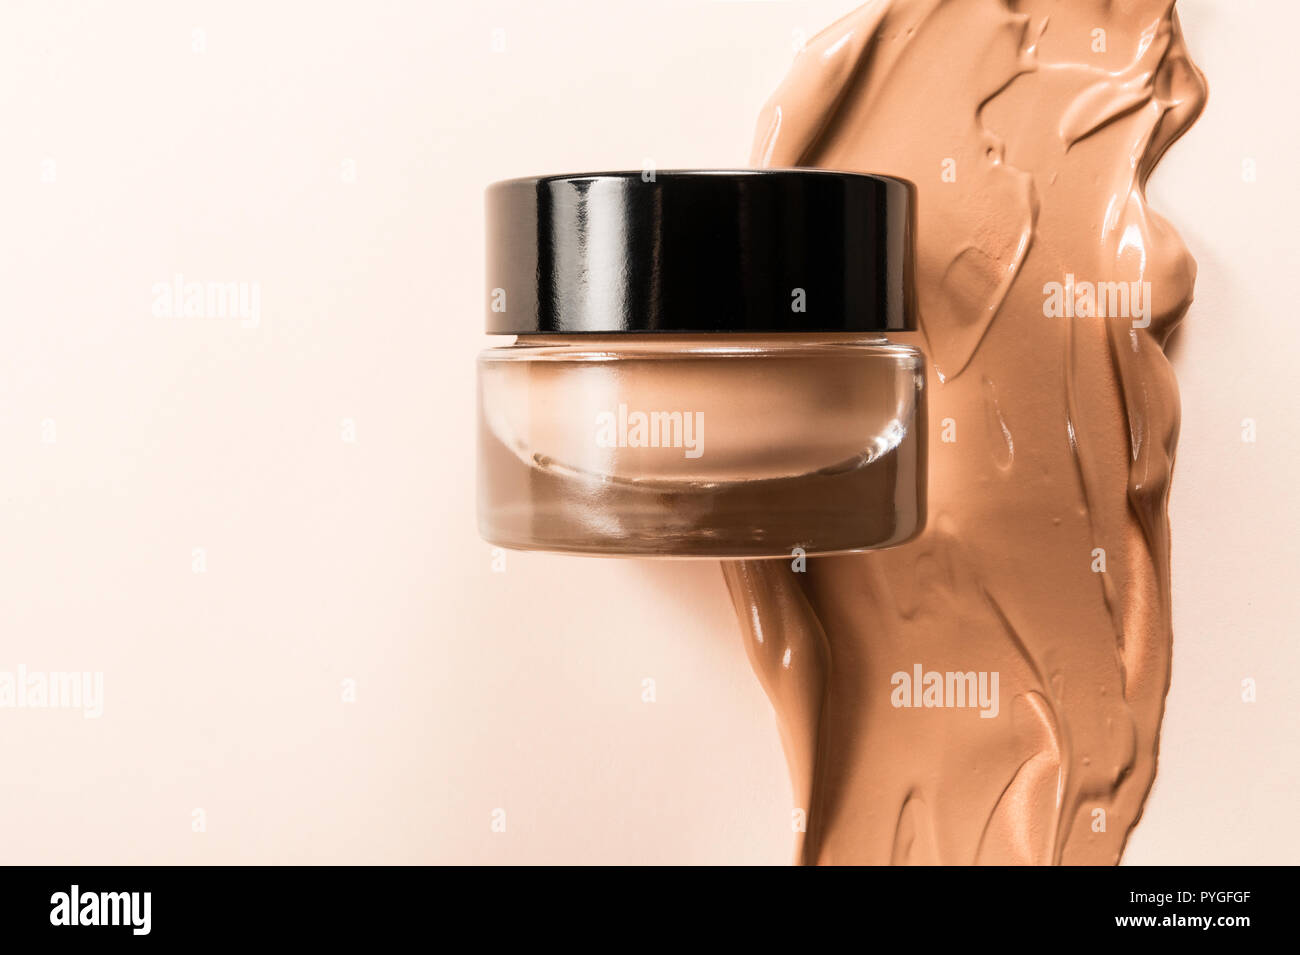 A glass jar of foundation for a face with a sample of the product itself. Stock Photo